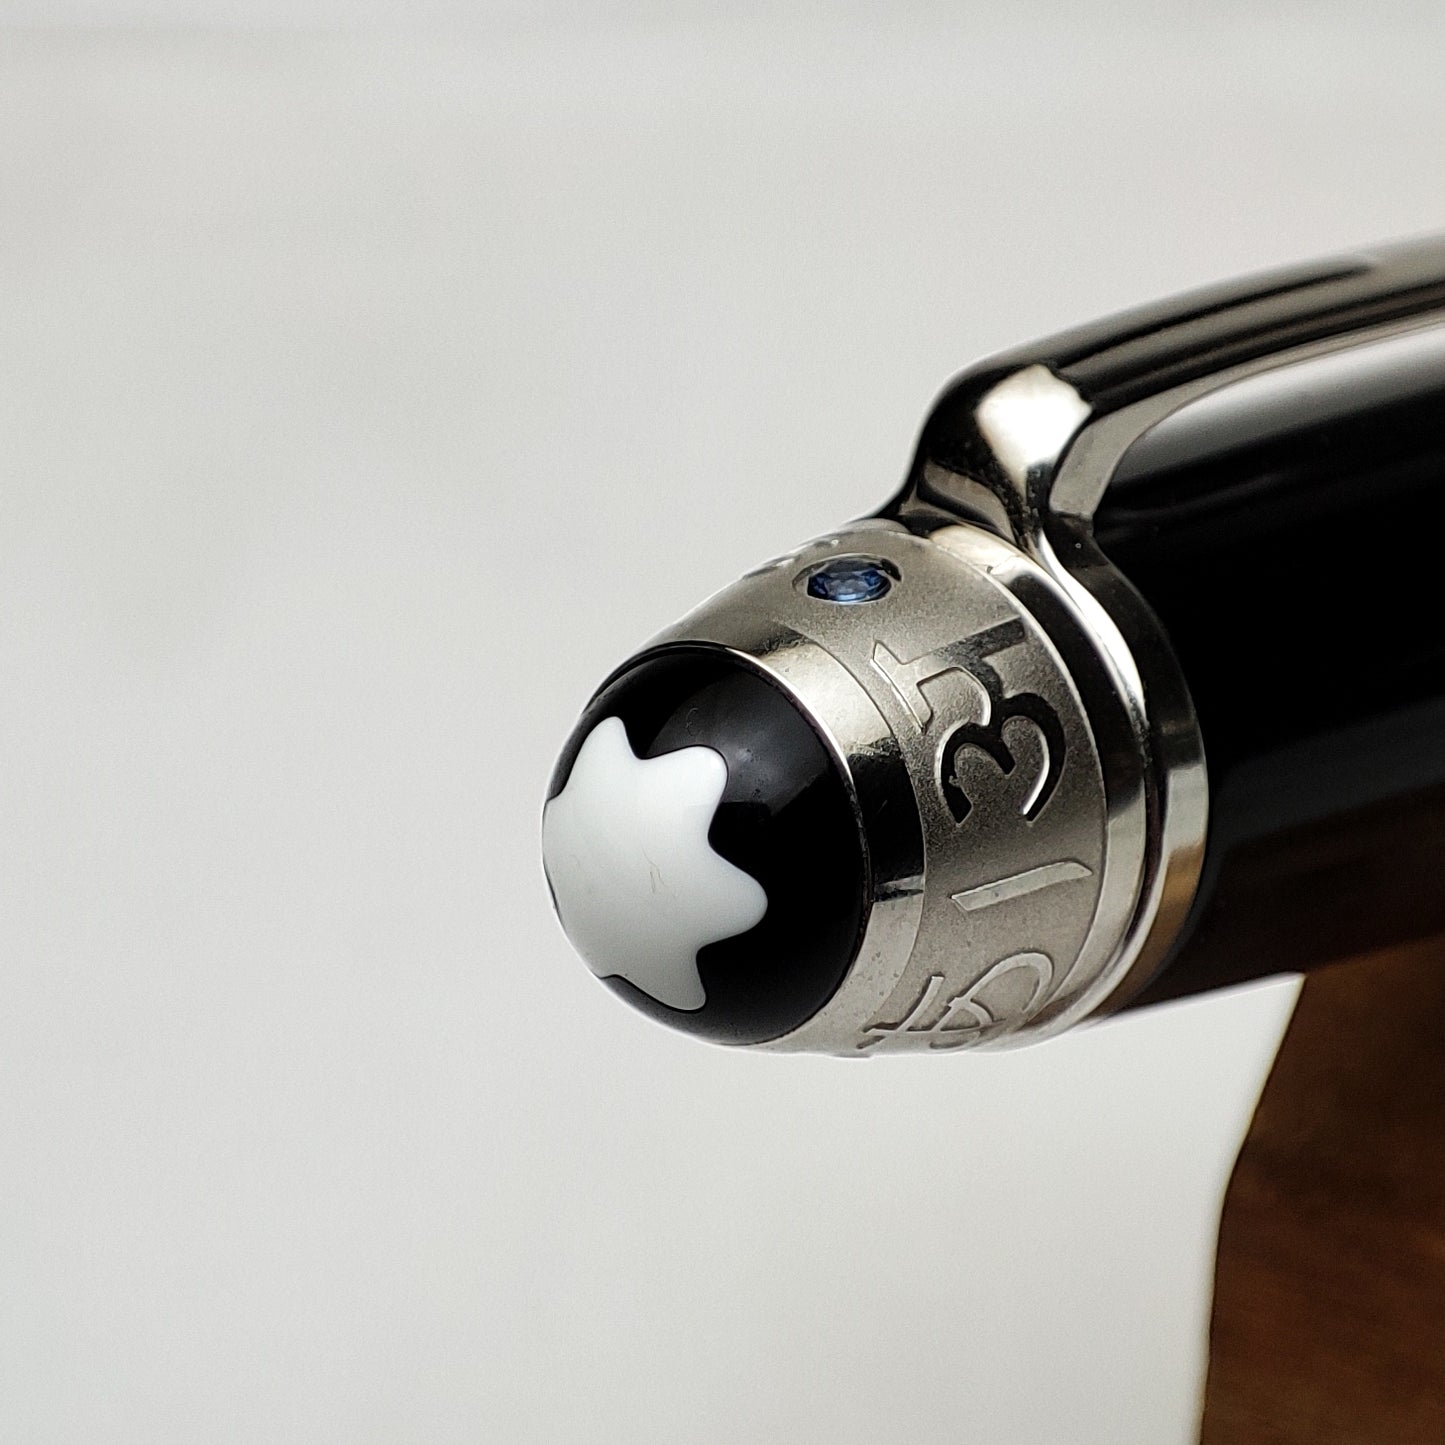 MONTBLANC MEISTERSTUCK 146 LEGRAND UNICEF SPECIAL EDITION (2017)